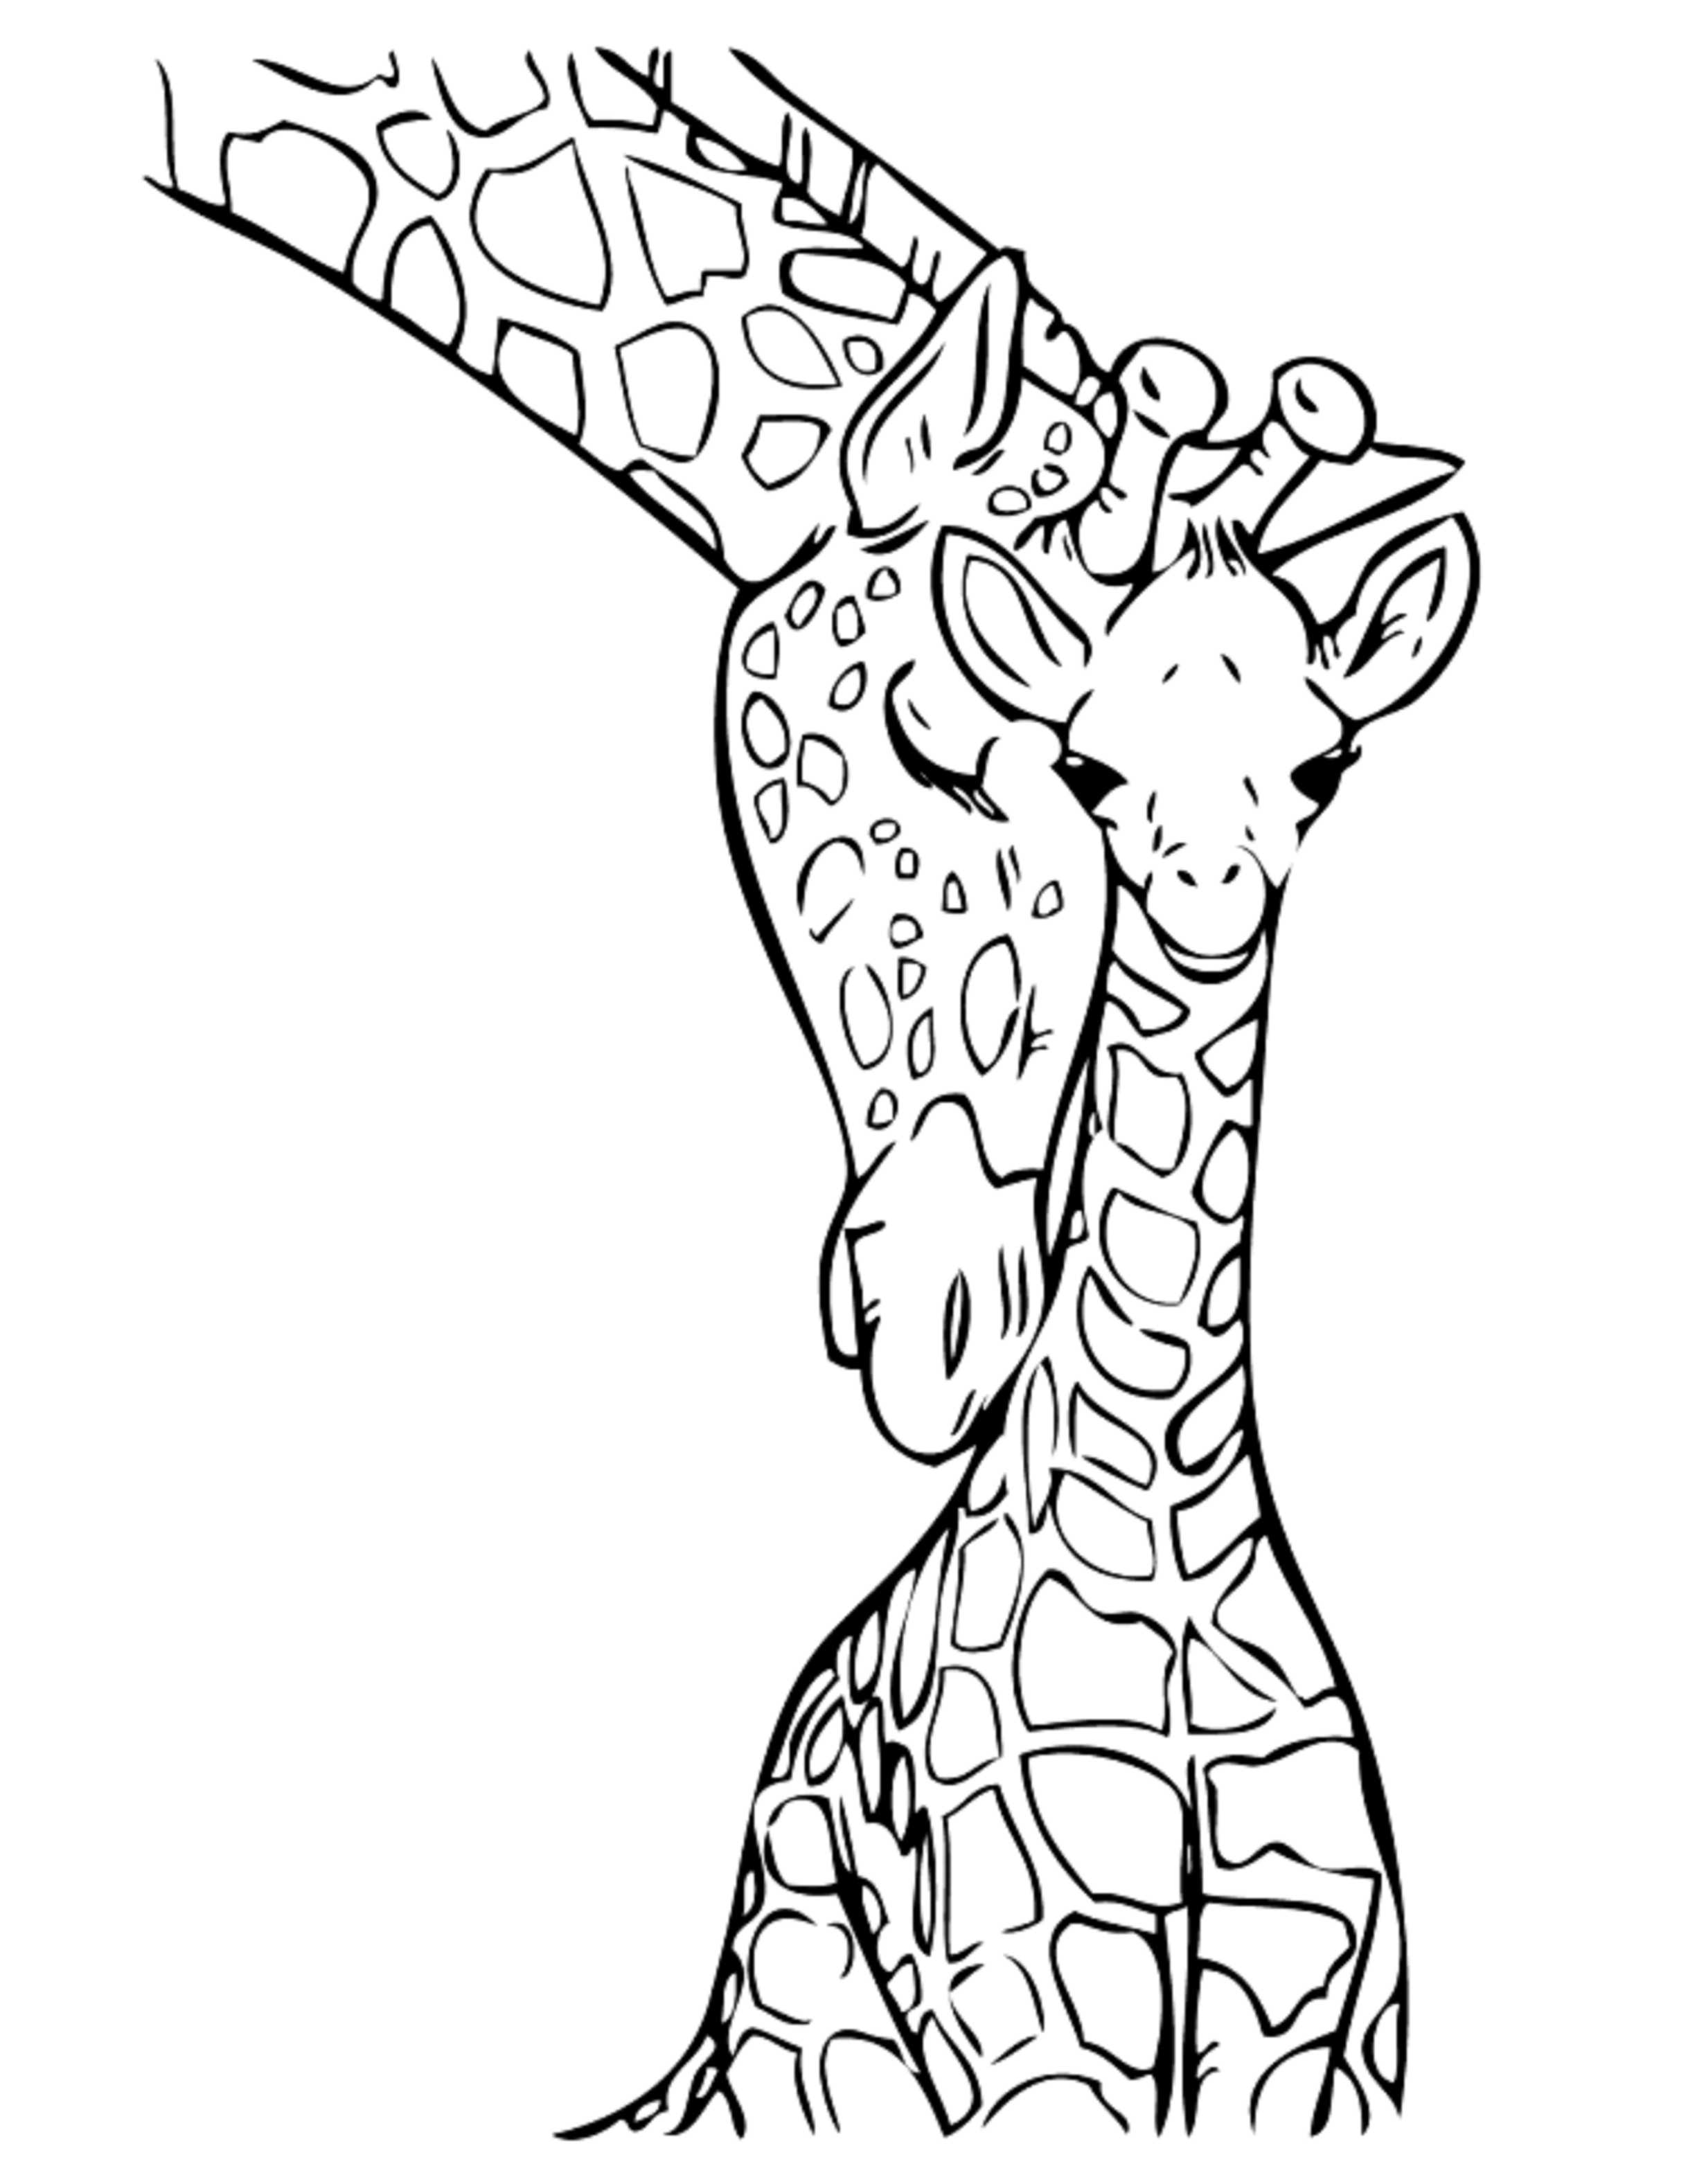 Download giraffe-coloring-pages | | BestAppsForKids.com